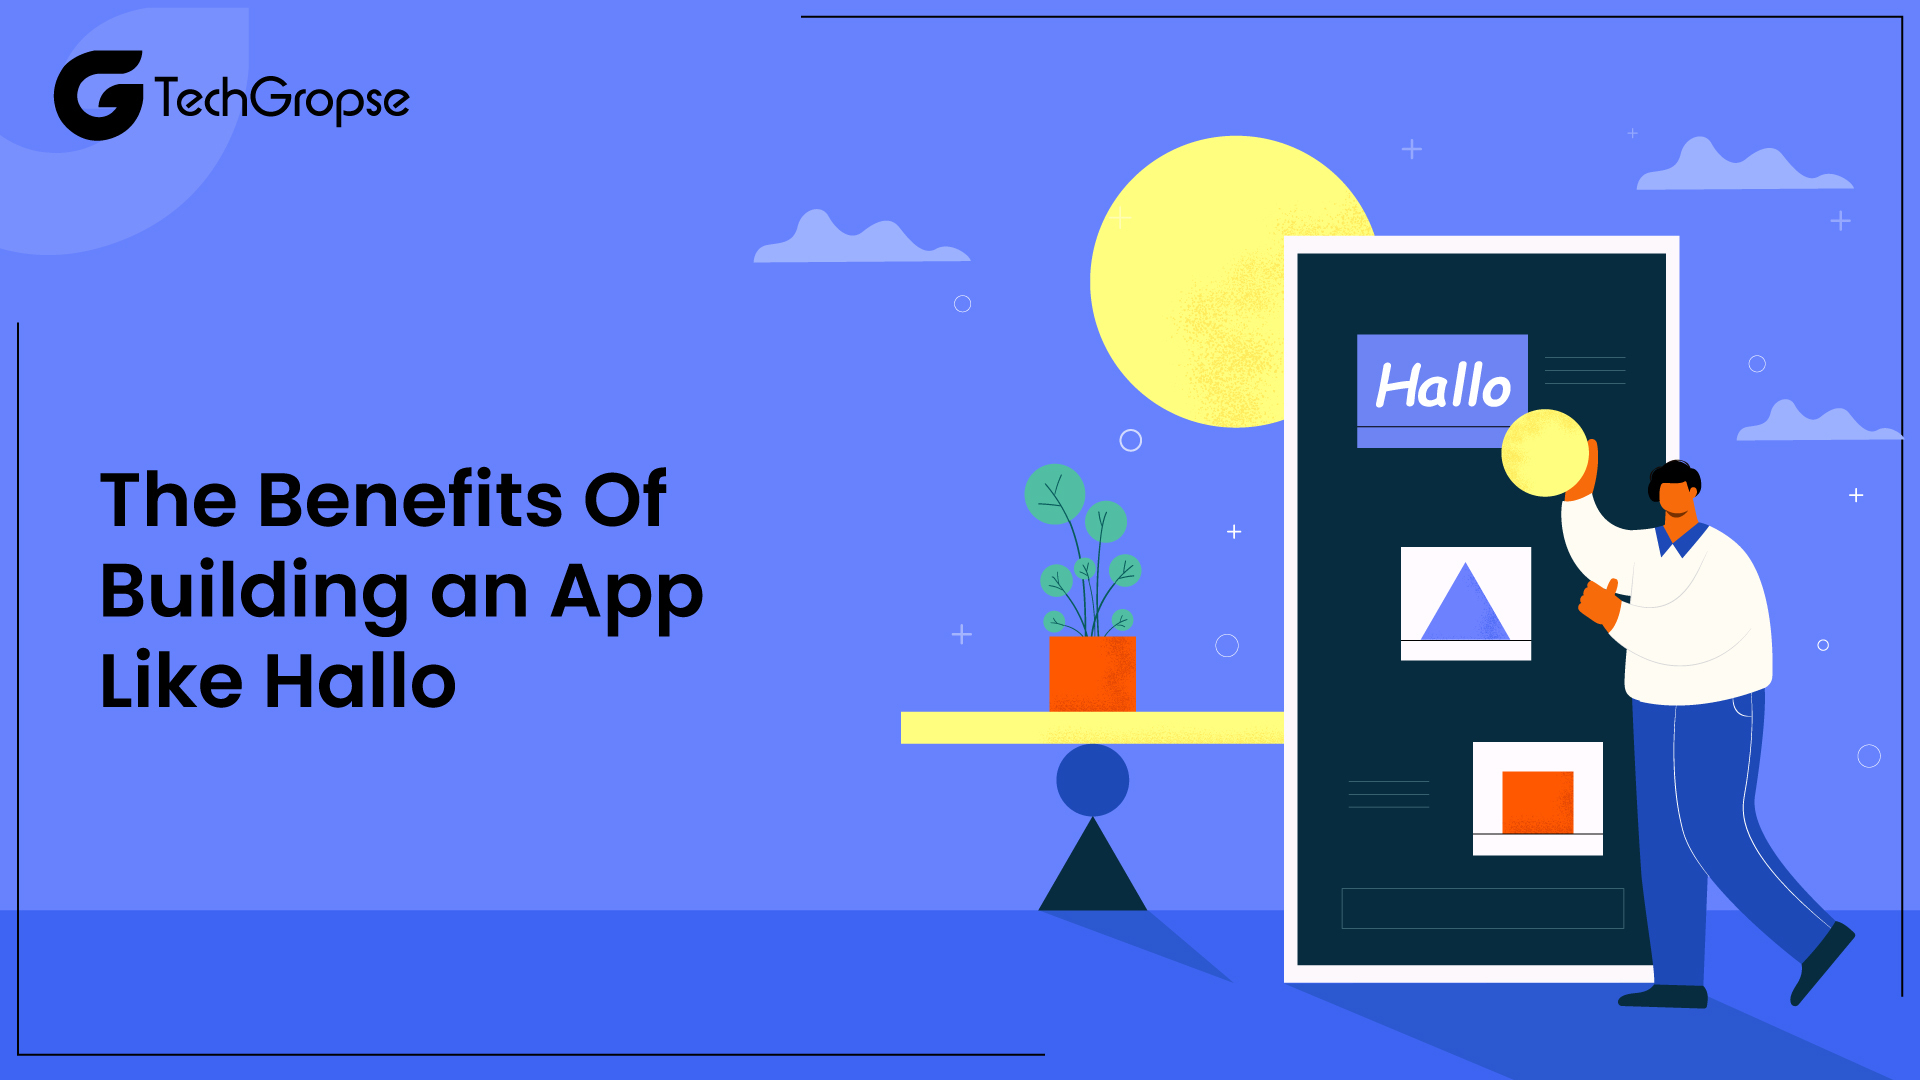 The Benefits Of Building an App Like Hallo